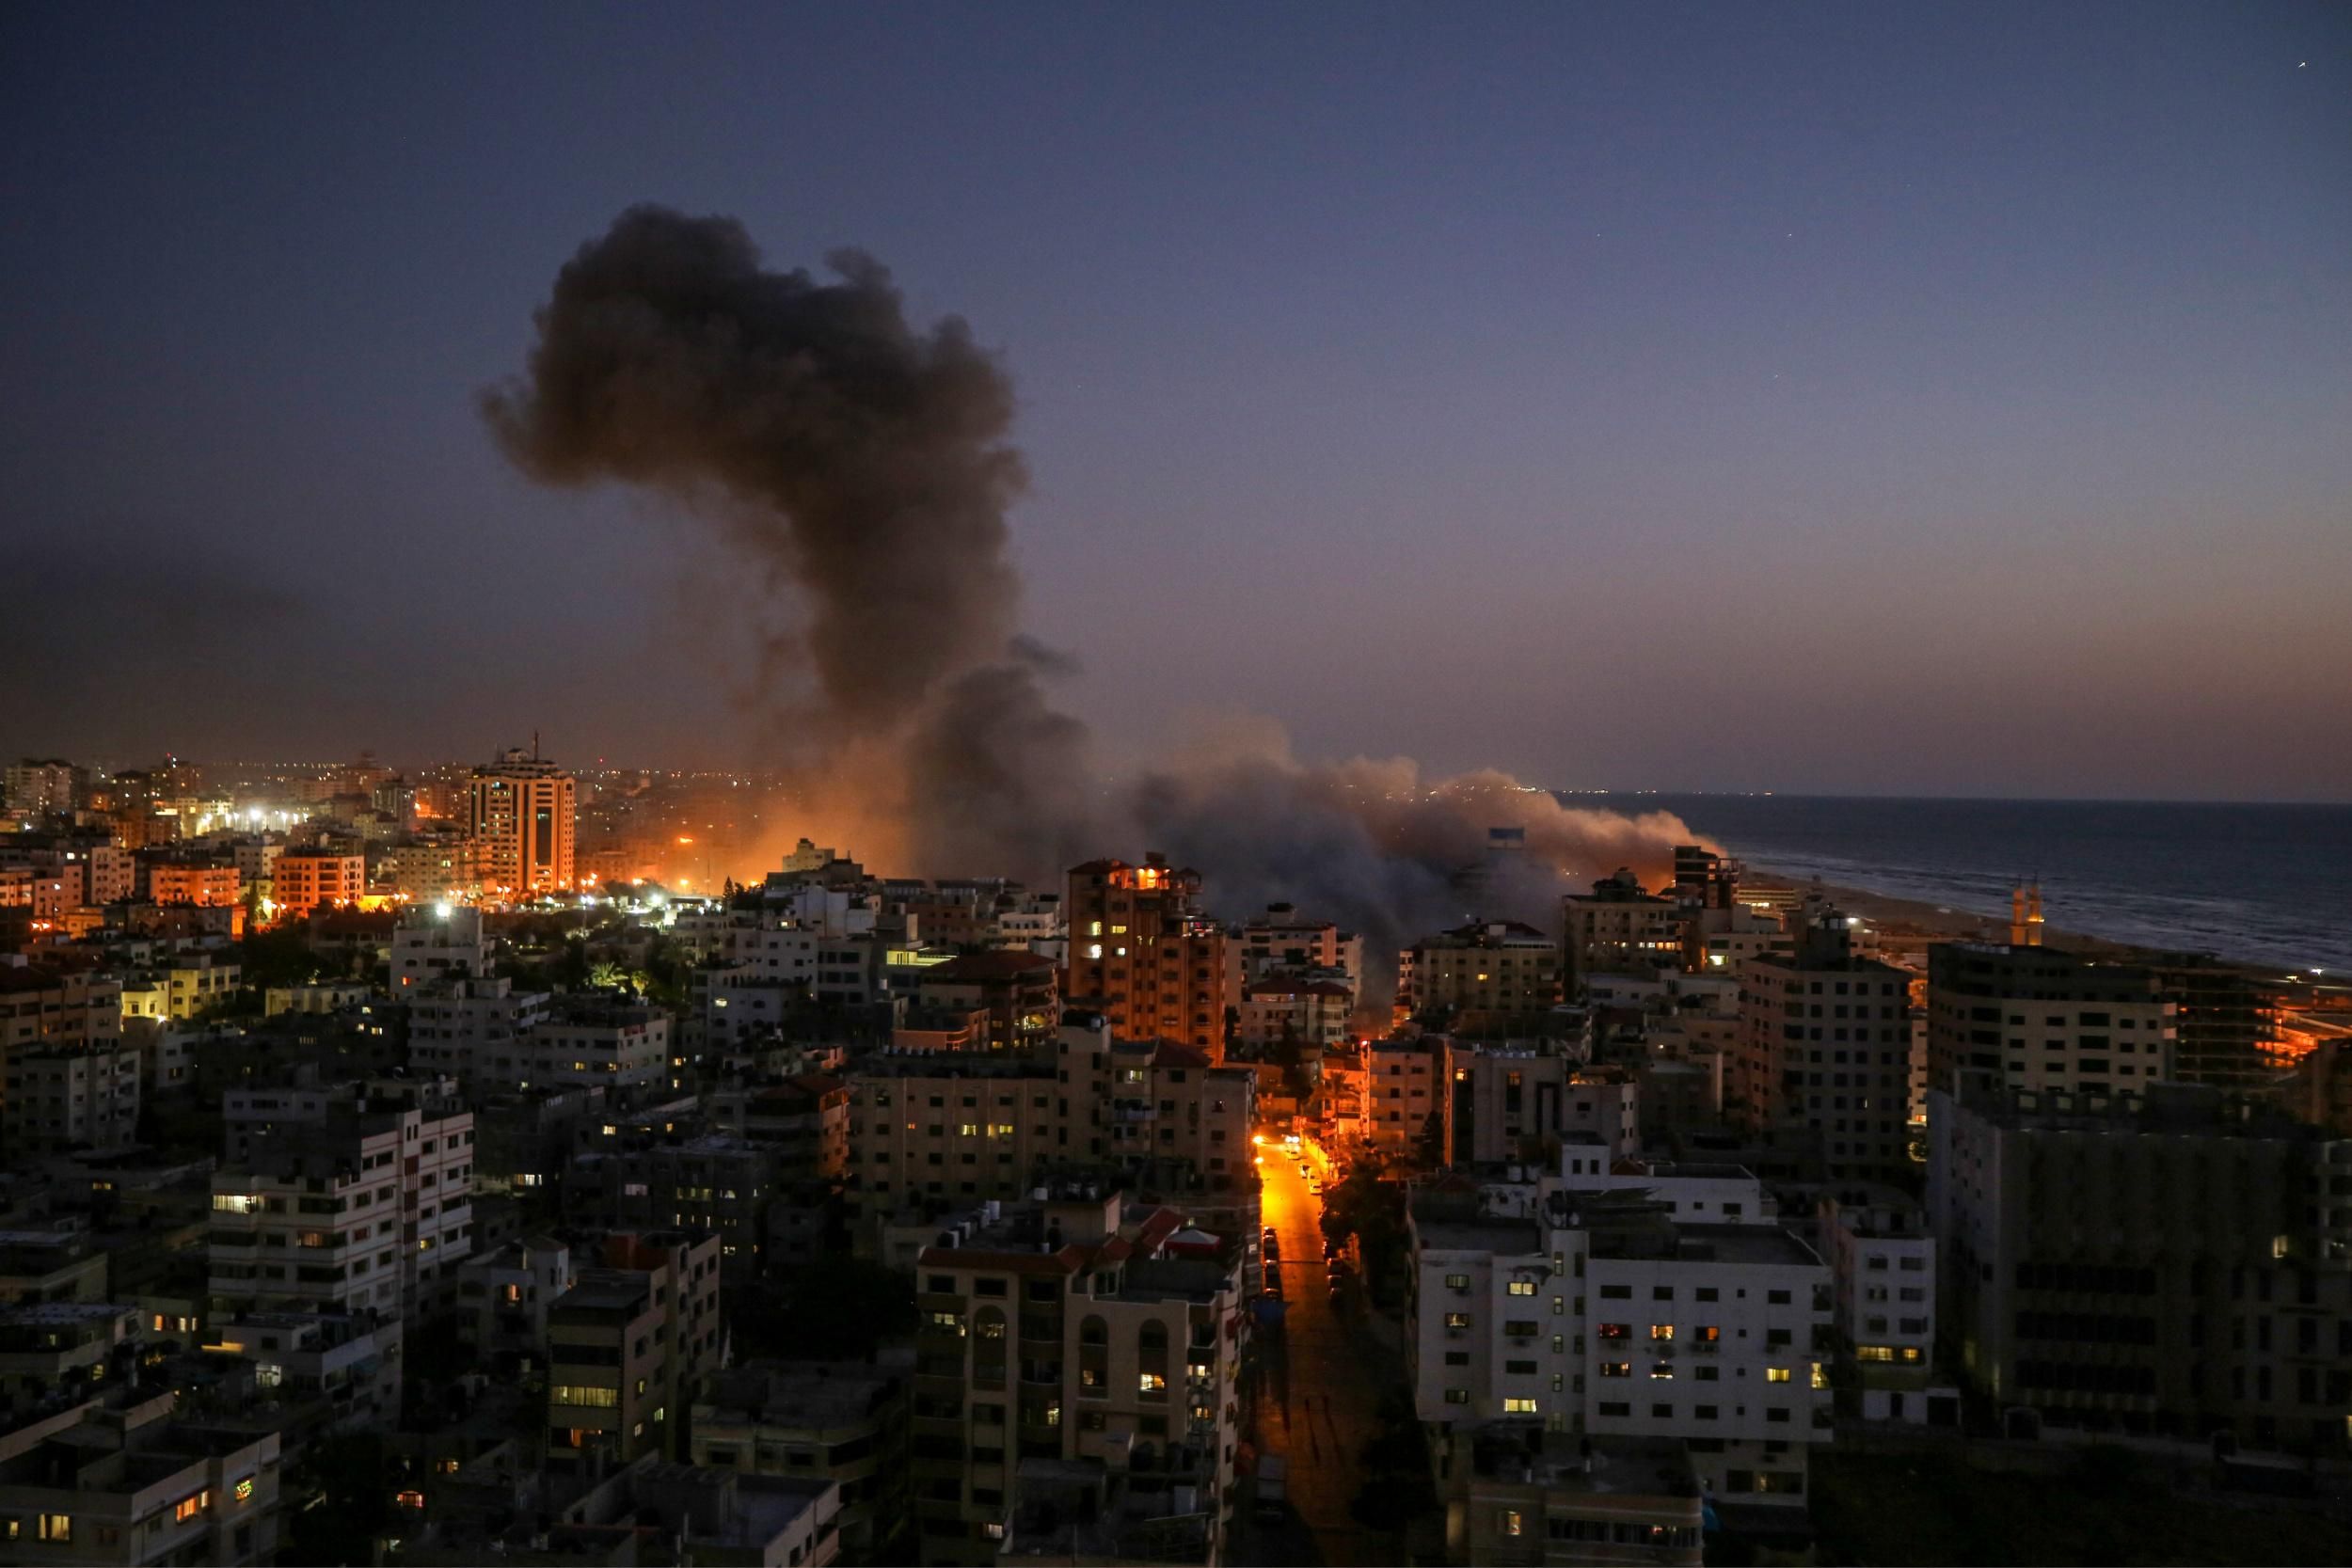 Flames and smoke rose from an area of Gaza City targeted by Israeli airstrikes in May 2021. (Photo: Ali Jadallah/Anadolu Agency via Getty Images) 